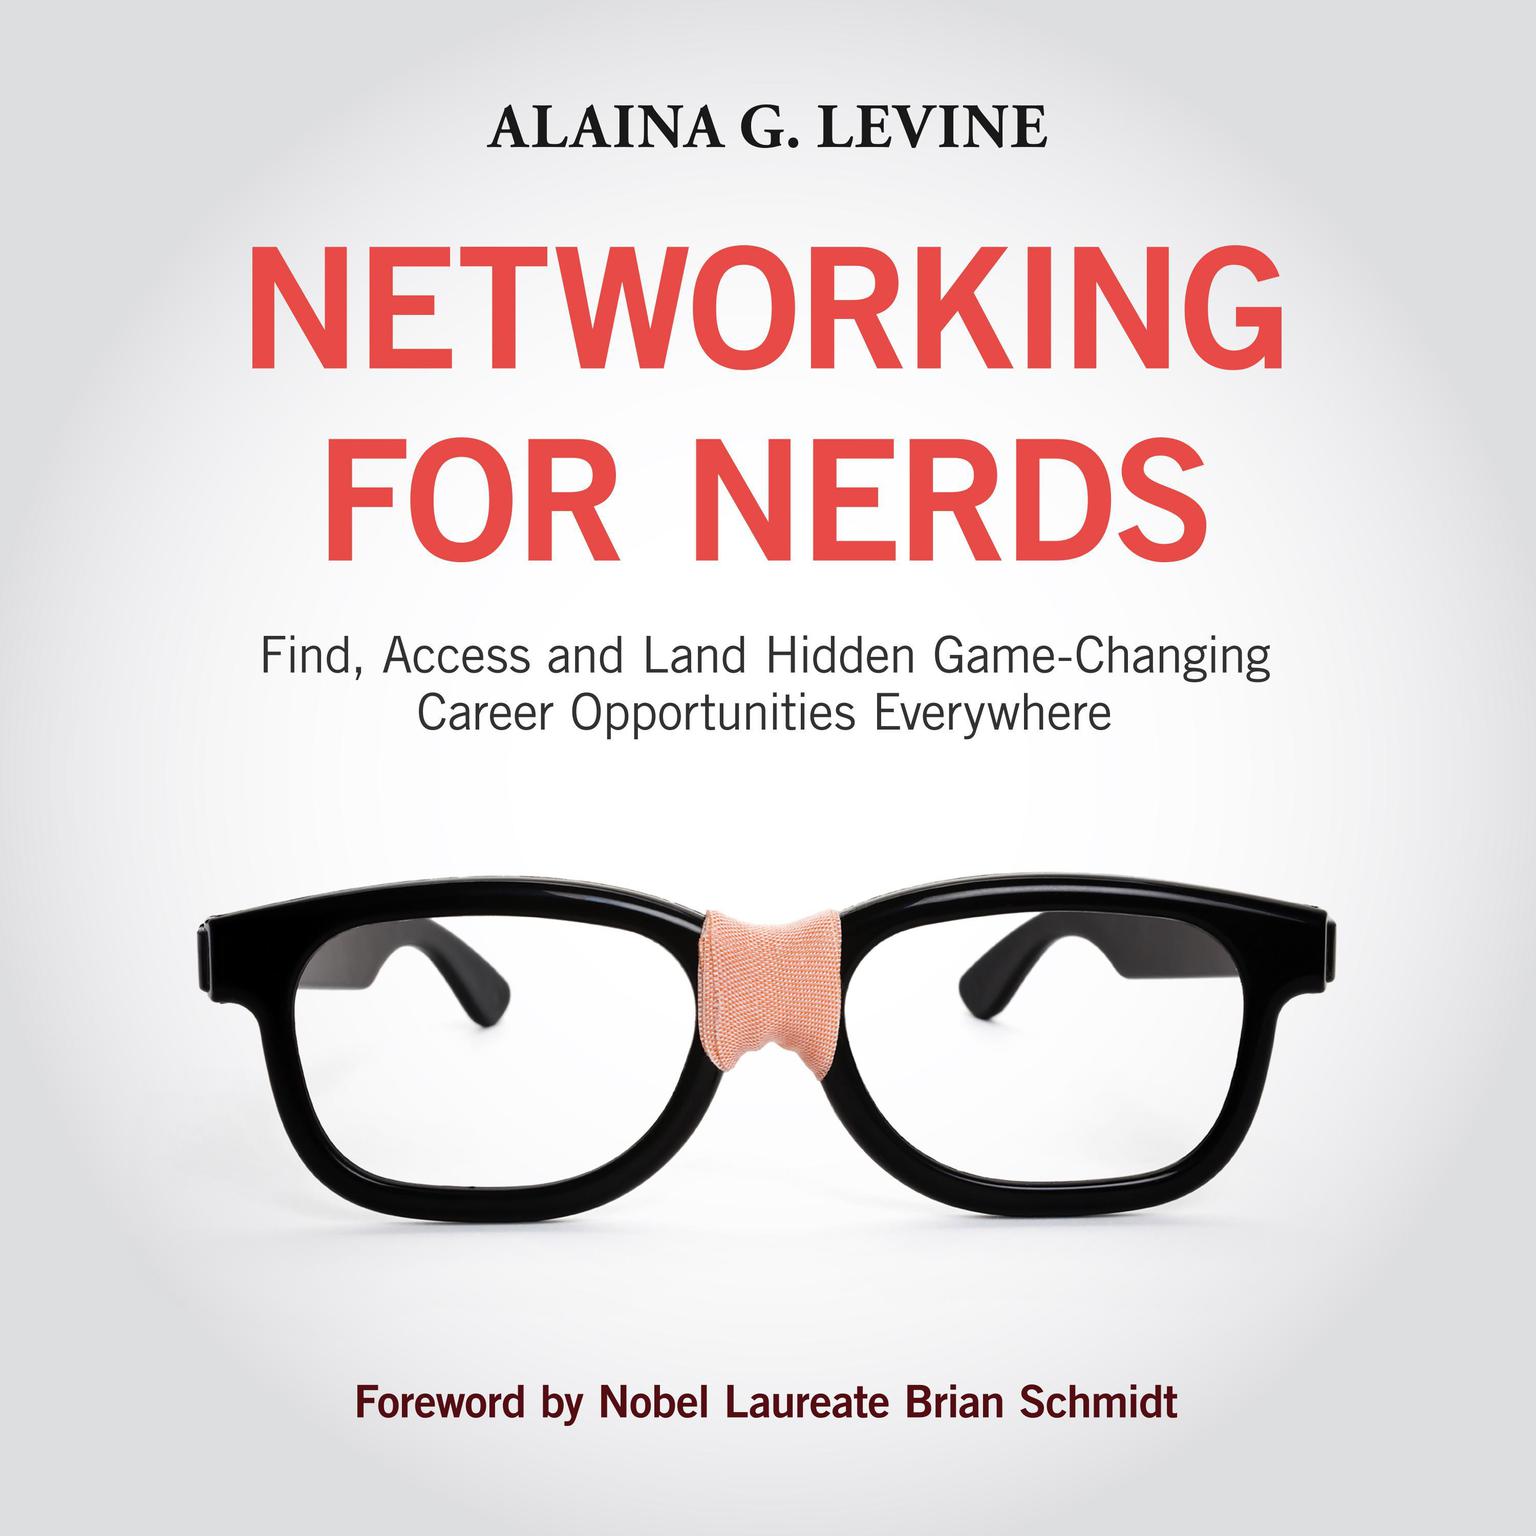 Networking for Nerds: Find, Access and Land Hidden Game-Changing Career Opportunities Everywhere Audiobook, by Alaina G. Levine